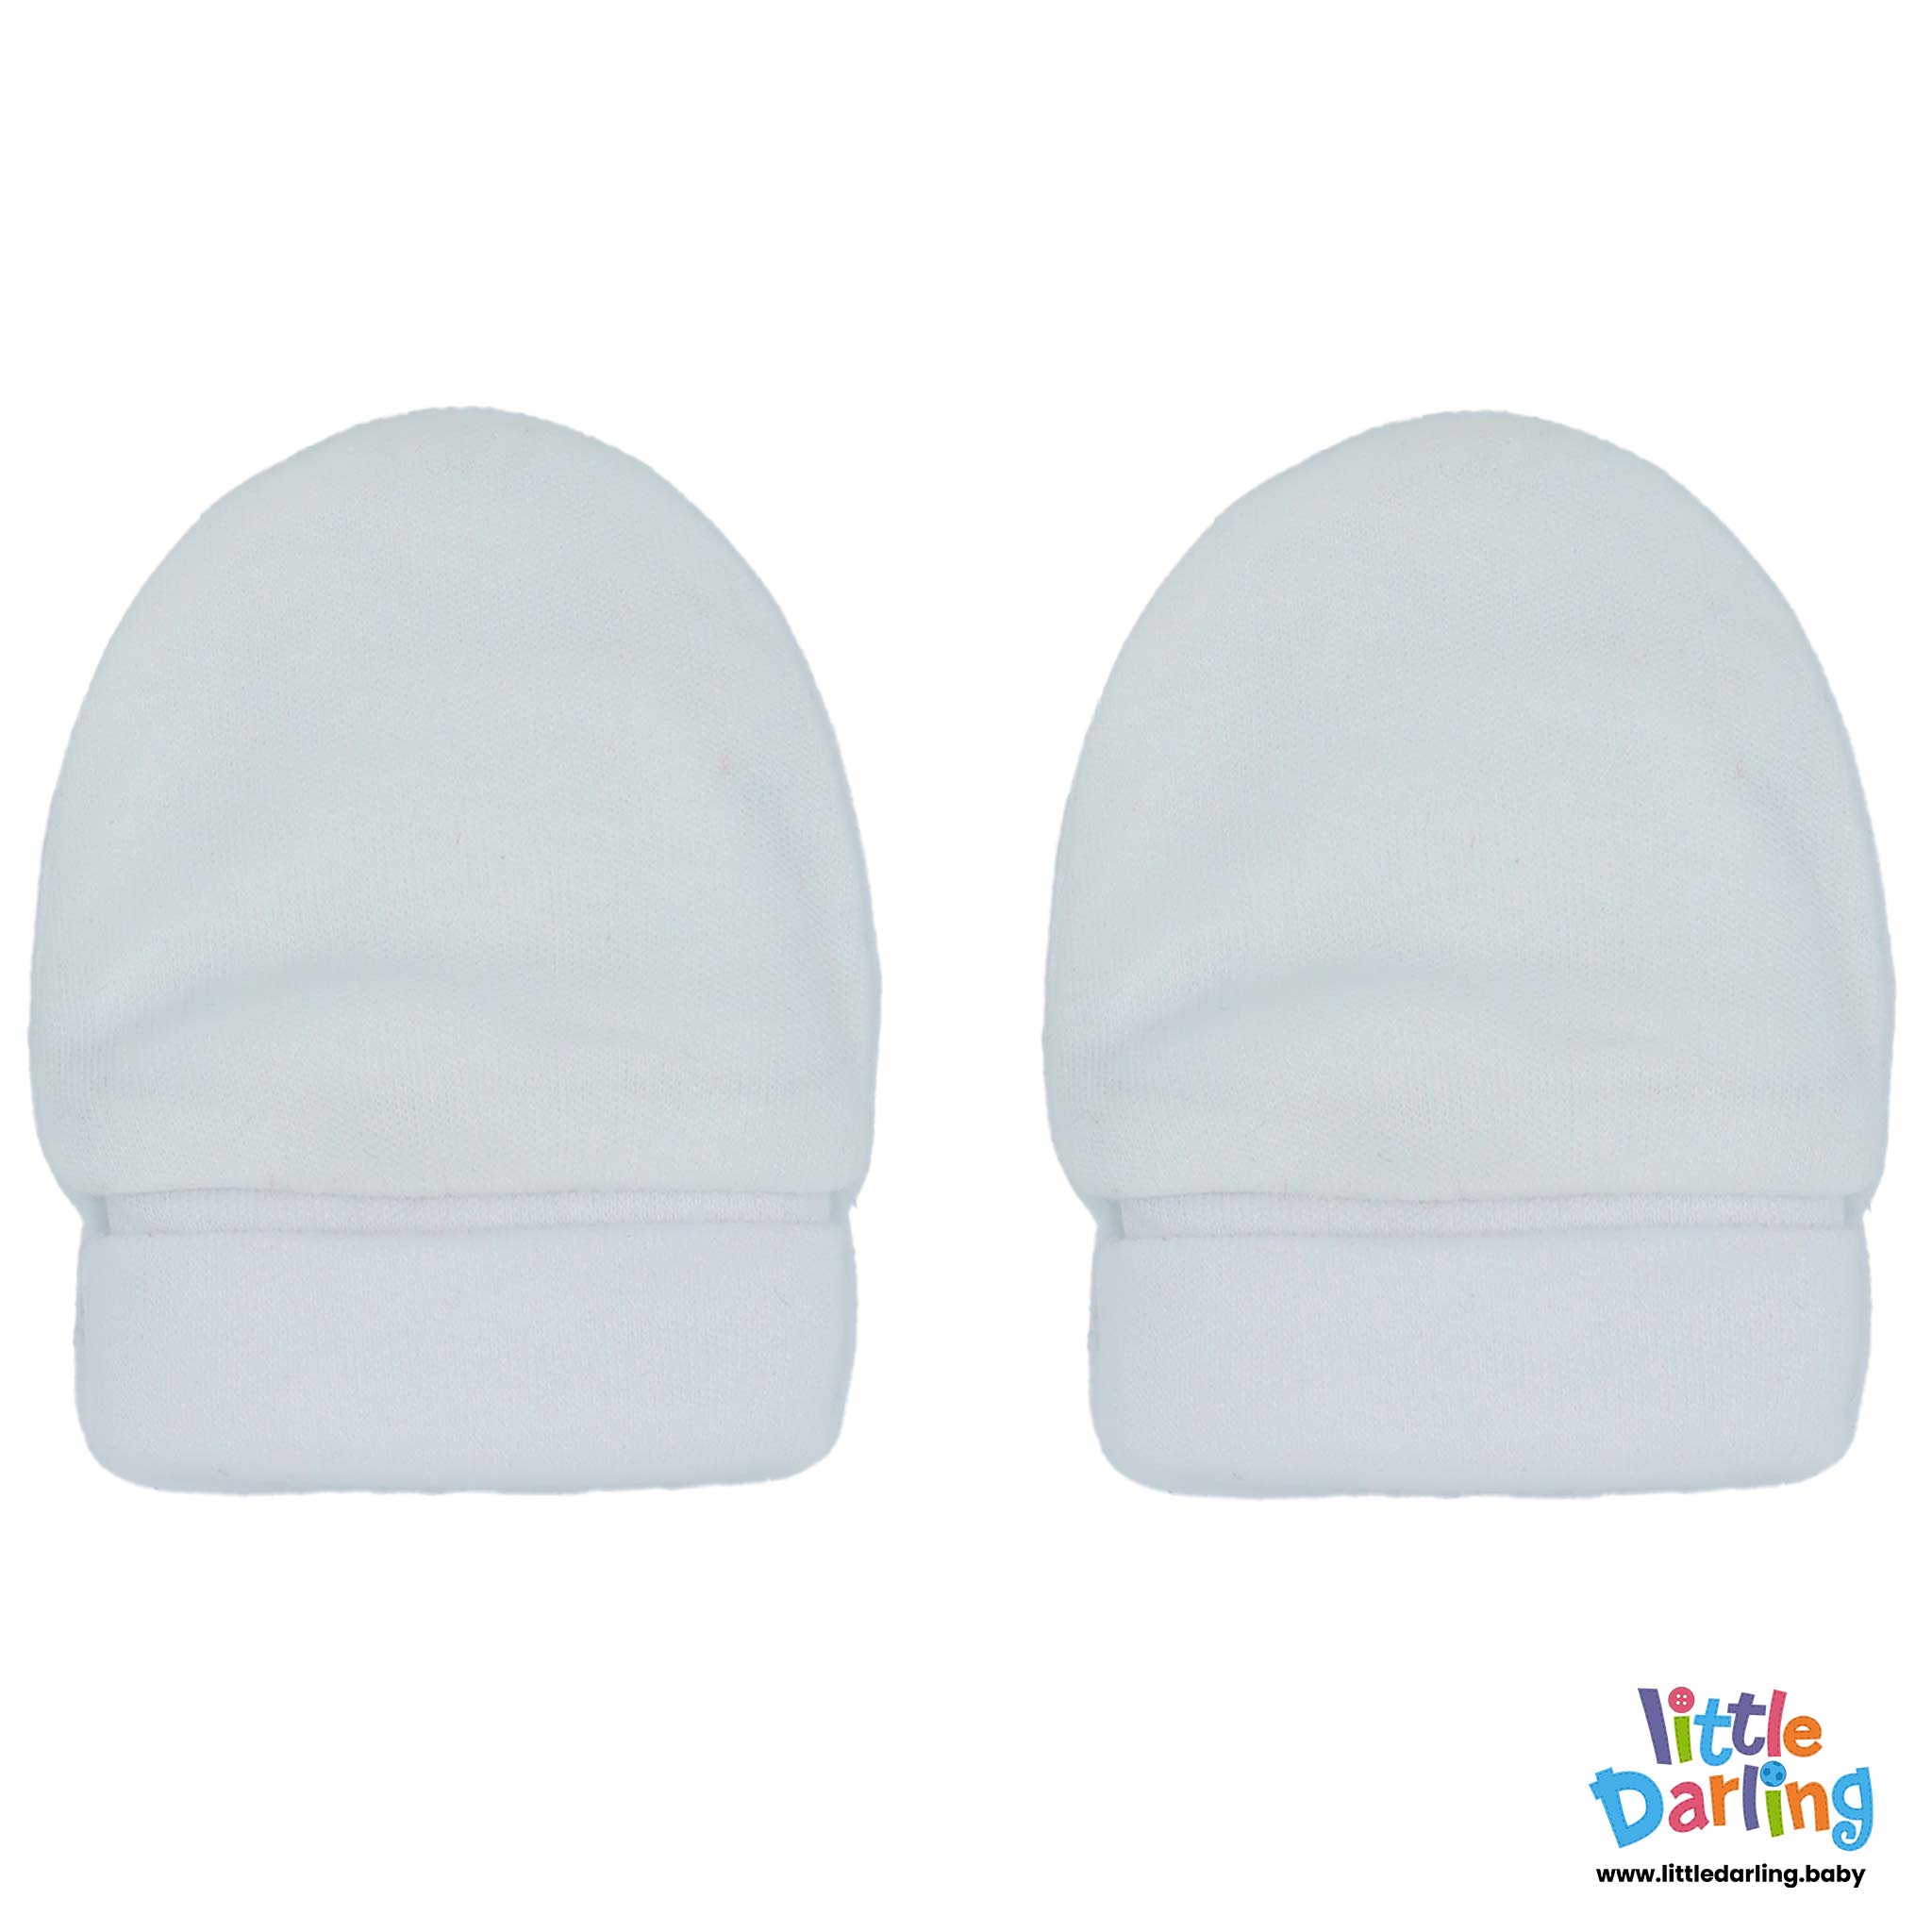 Baby Mittens Pair Pk of 2 White Color by Little Darling